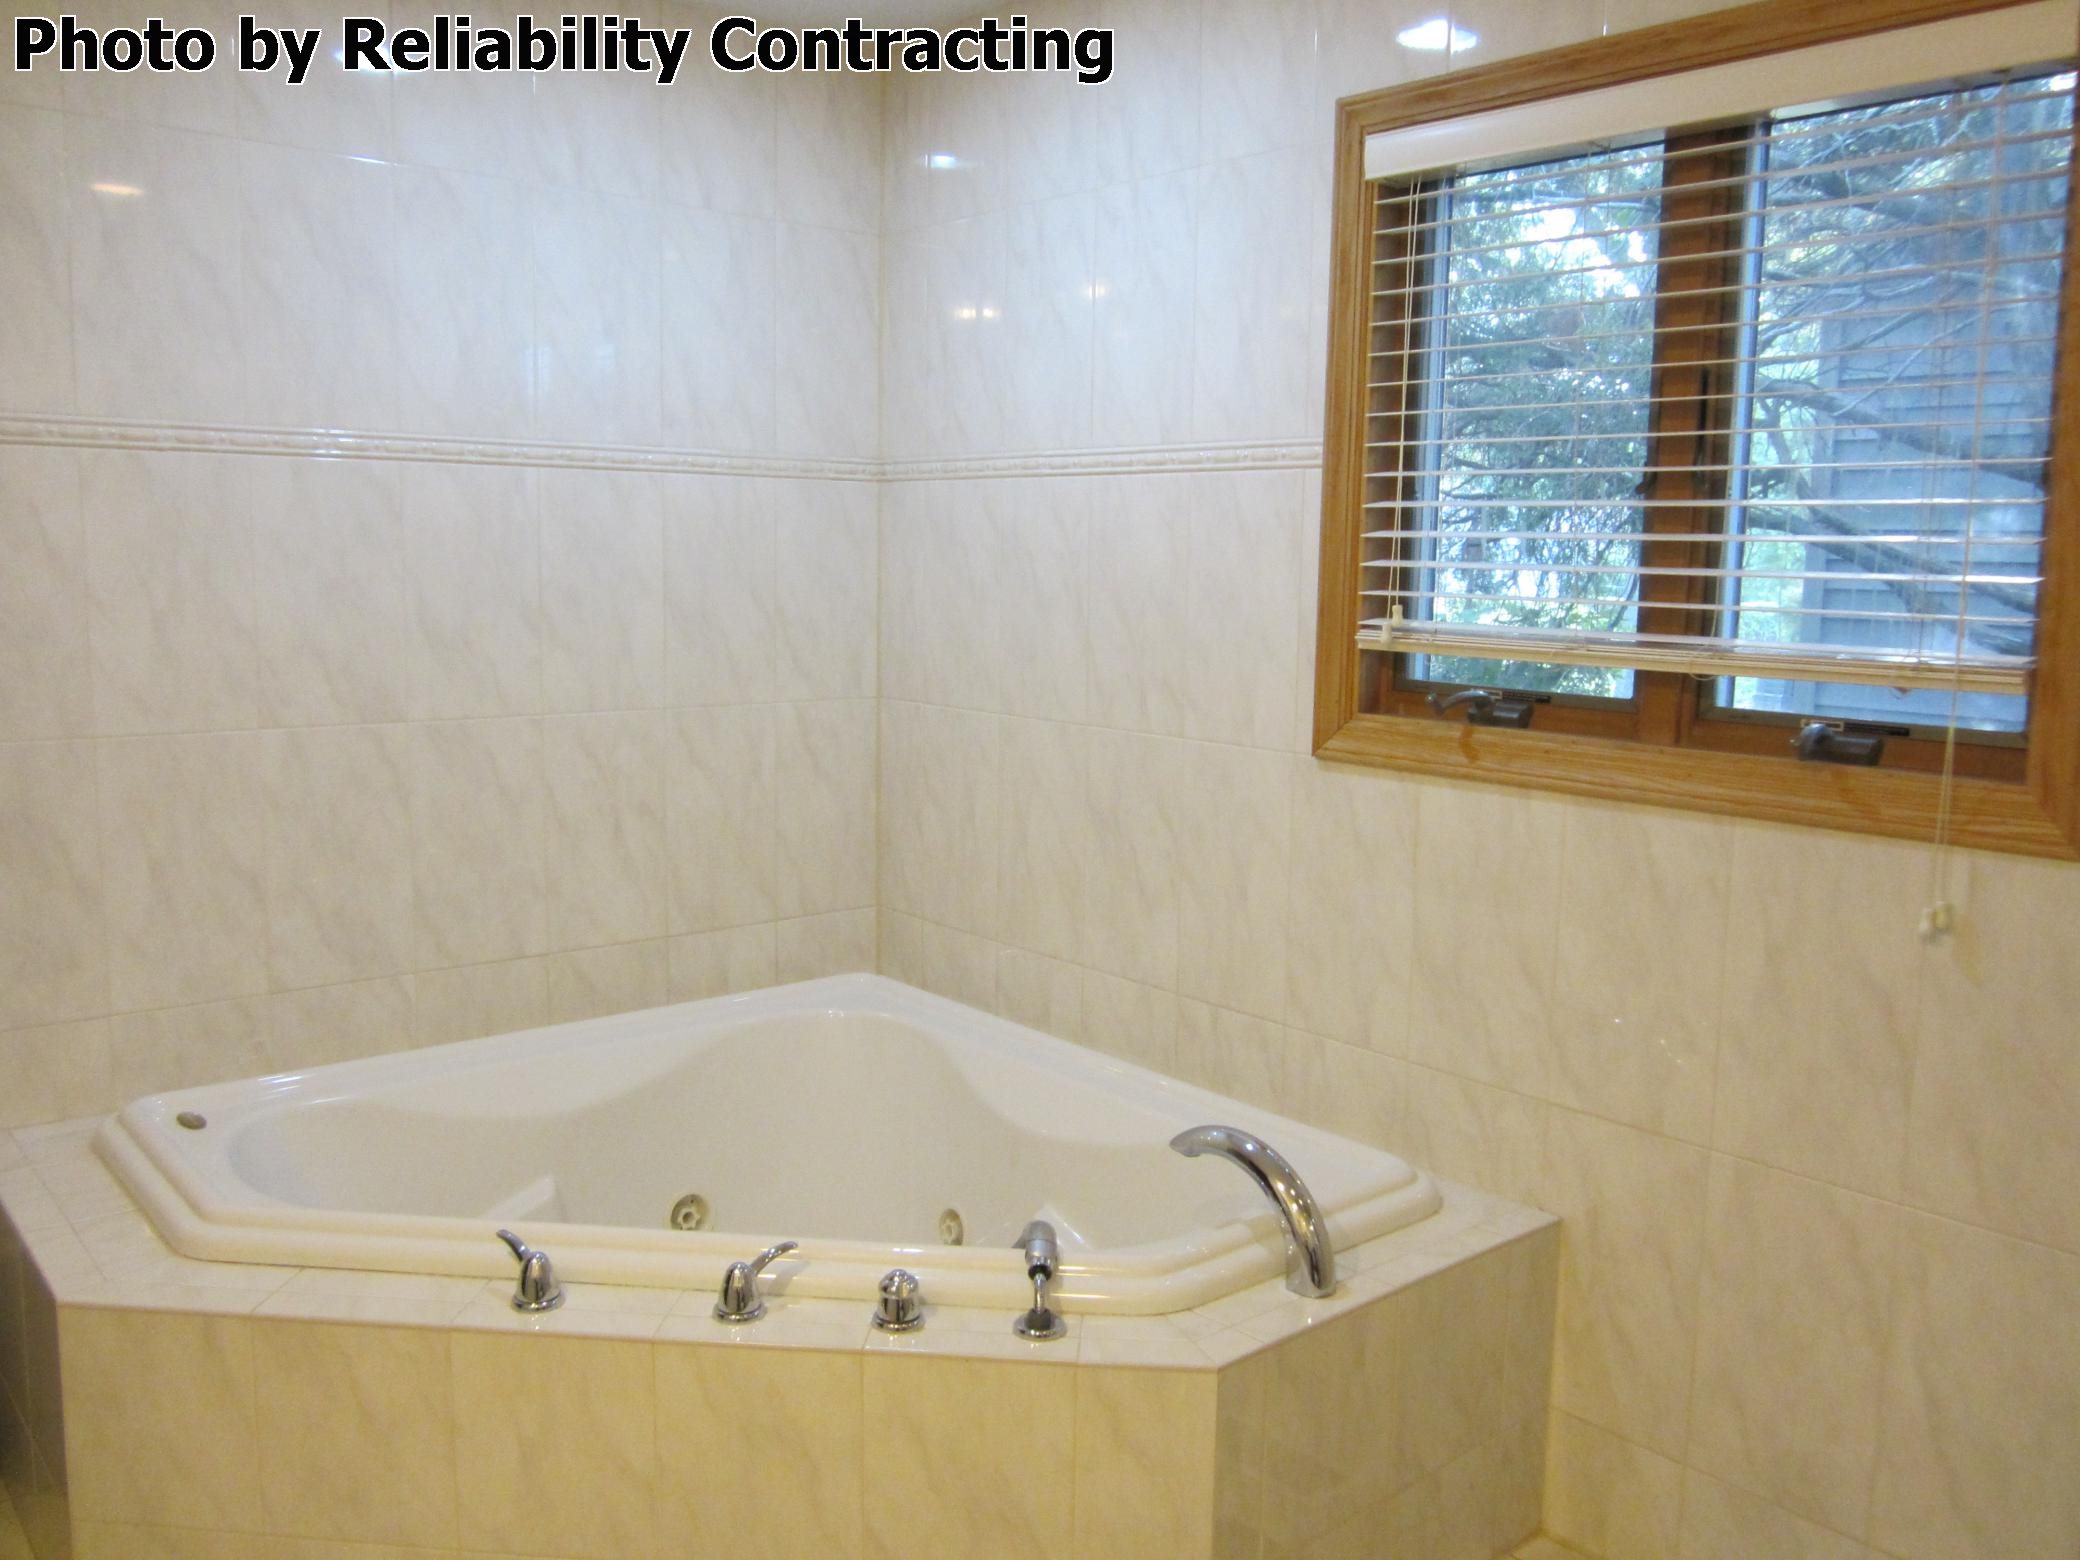 Work by Reliability Contracting